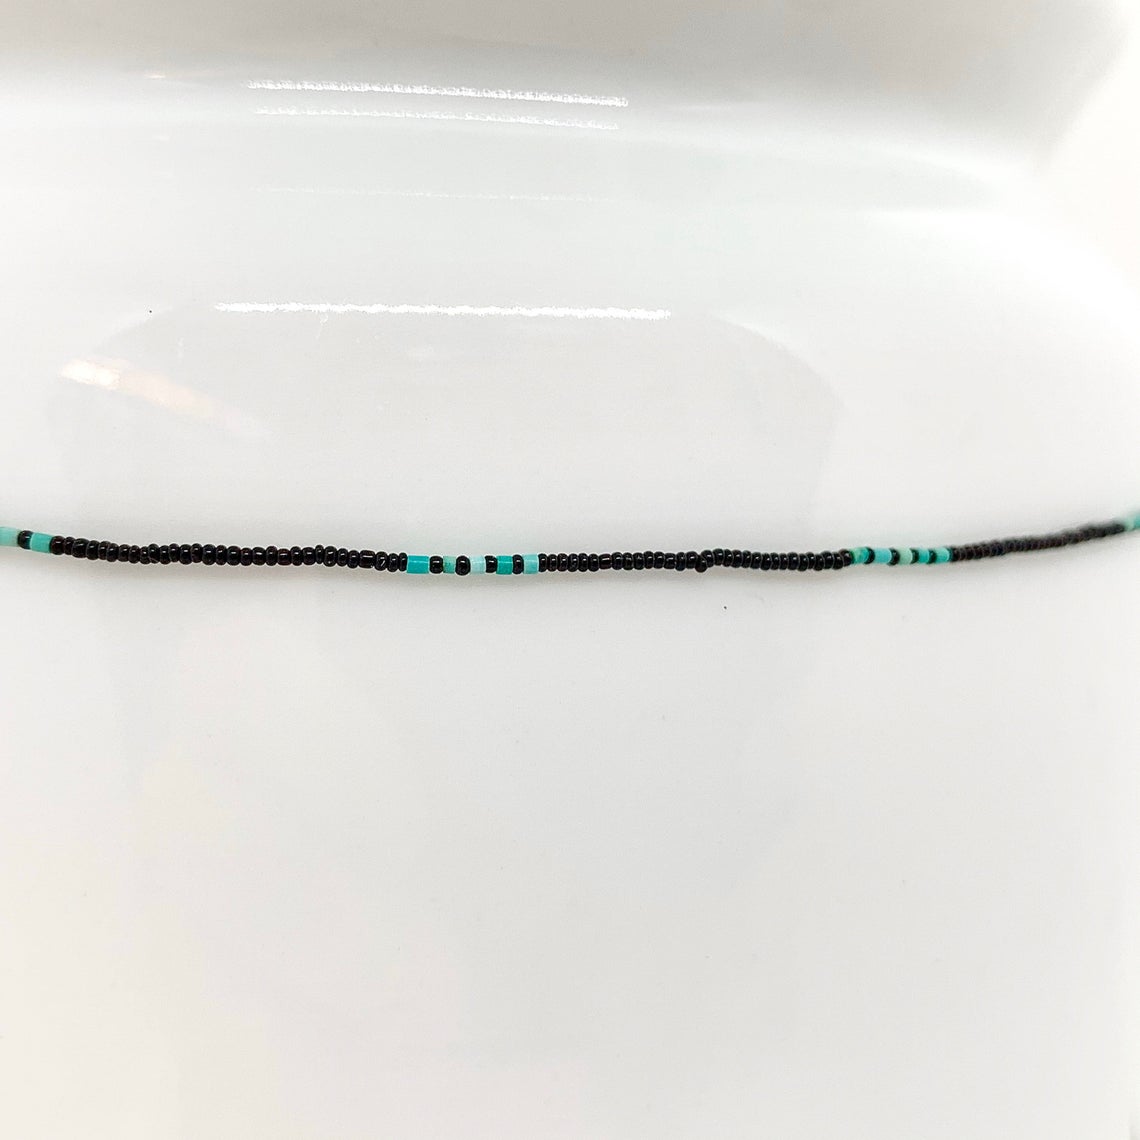 String Beaded Necklace w/ Turquoise Beads & Antique Italian Beads